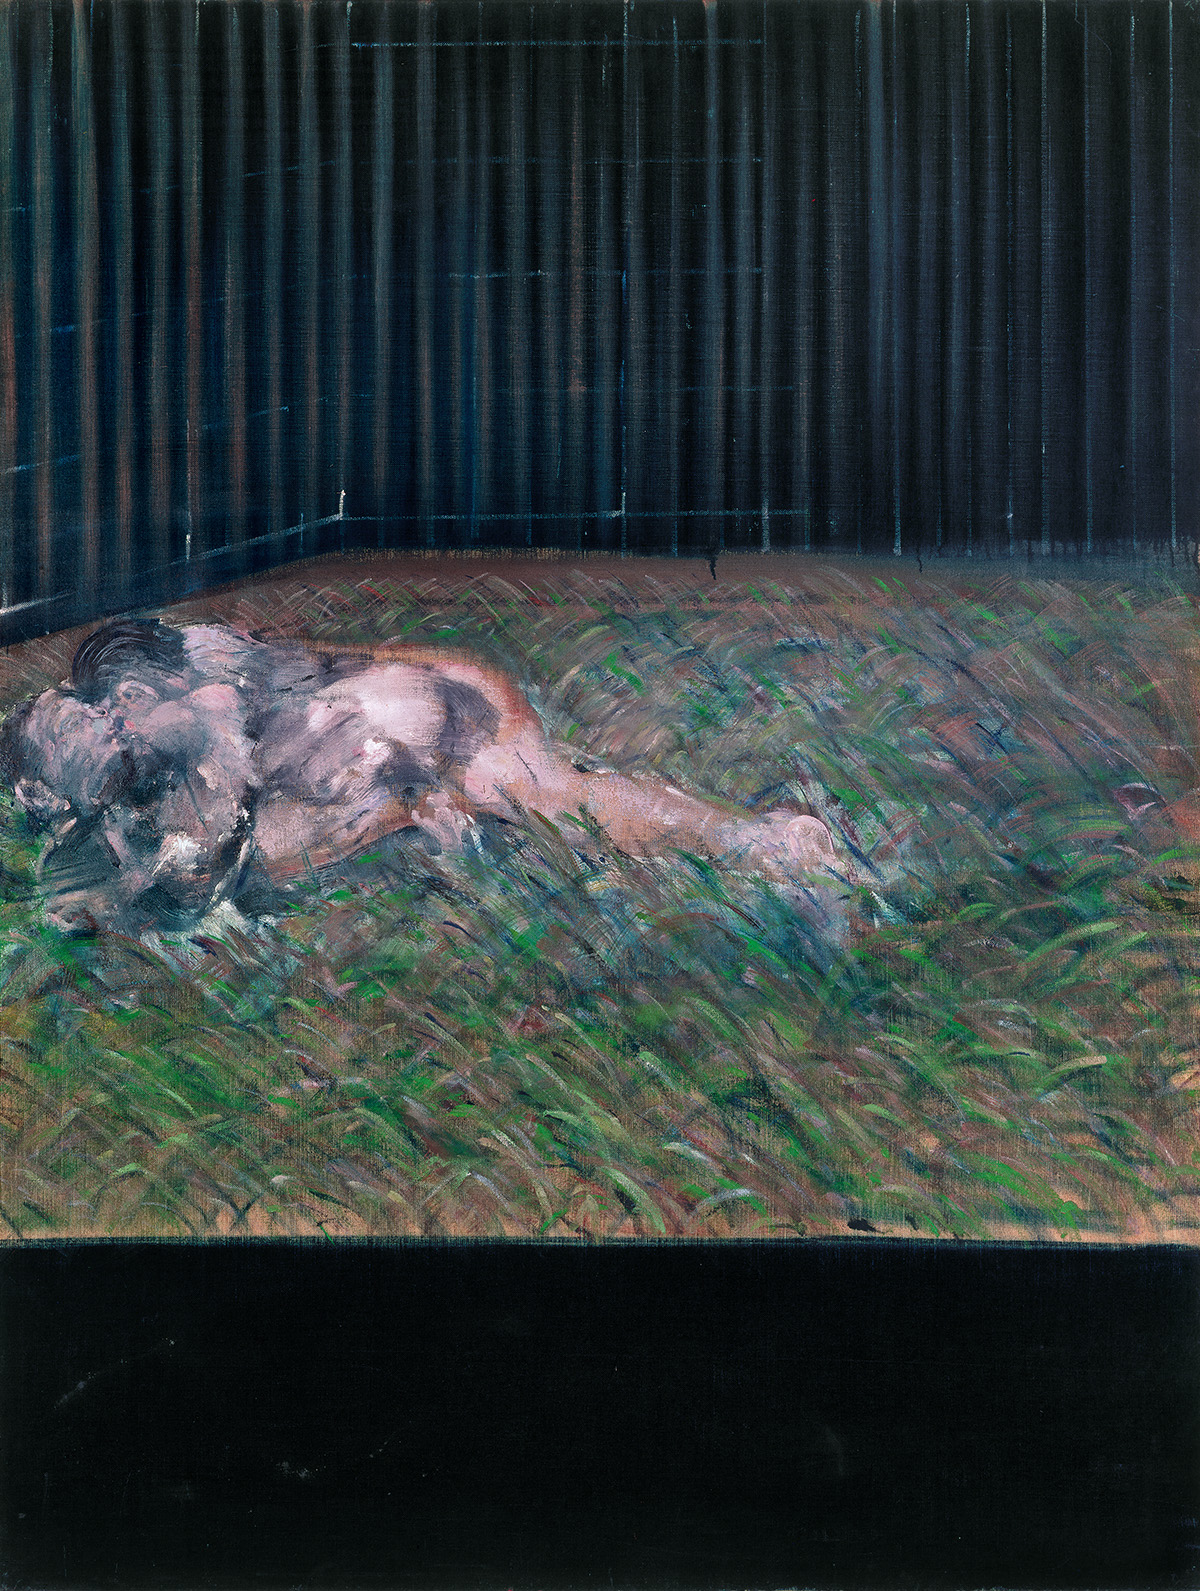 Francis Bacon, Two Figures in the Grass, 1954. Oil on canvas. CR number 54-01. © The Estate of Francis Bacon / DACS London 2020. All rights reserved.